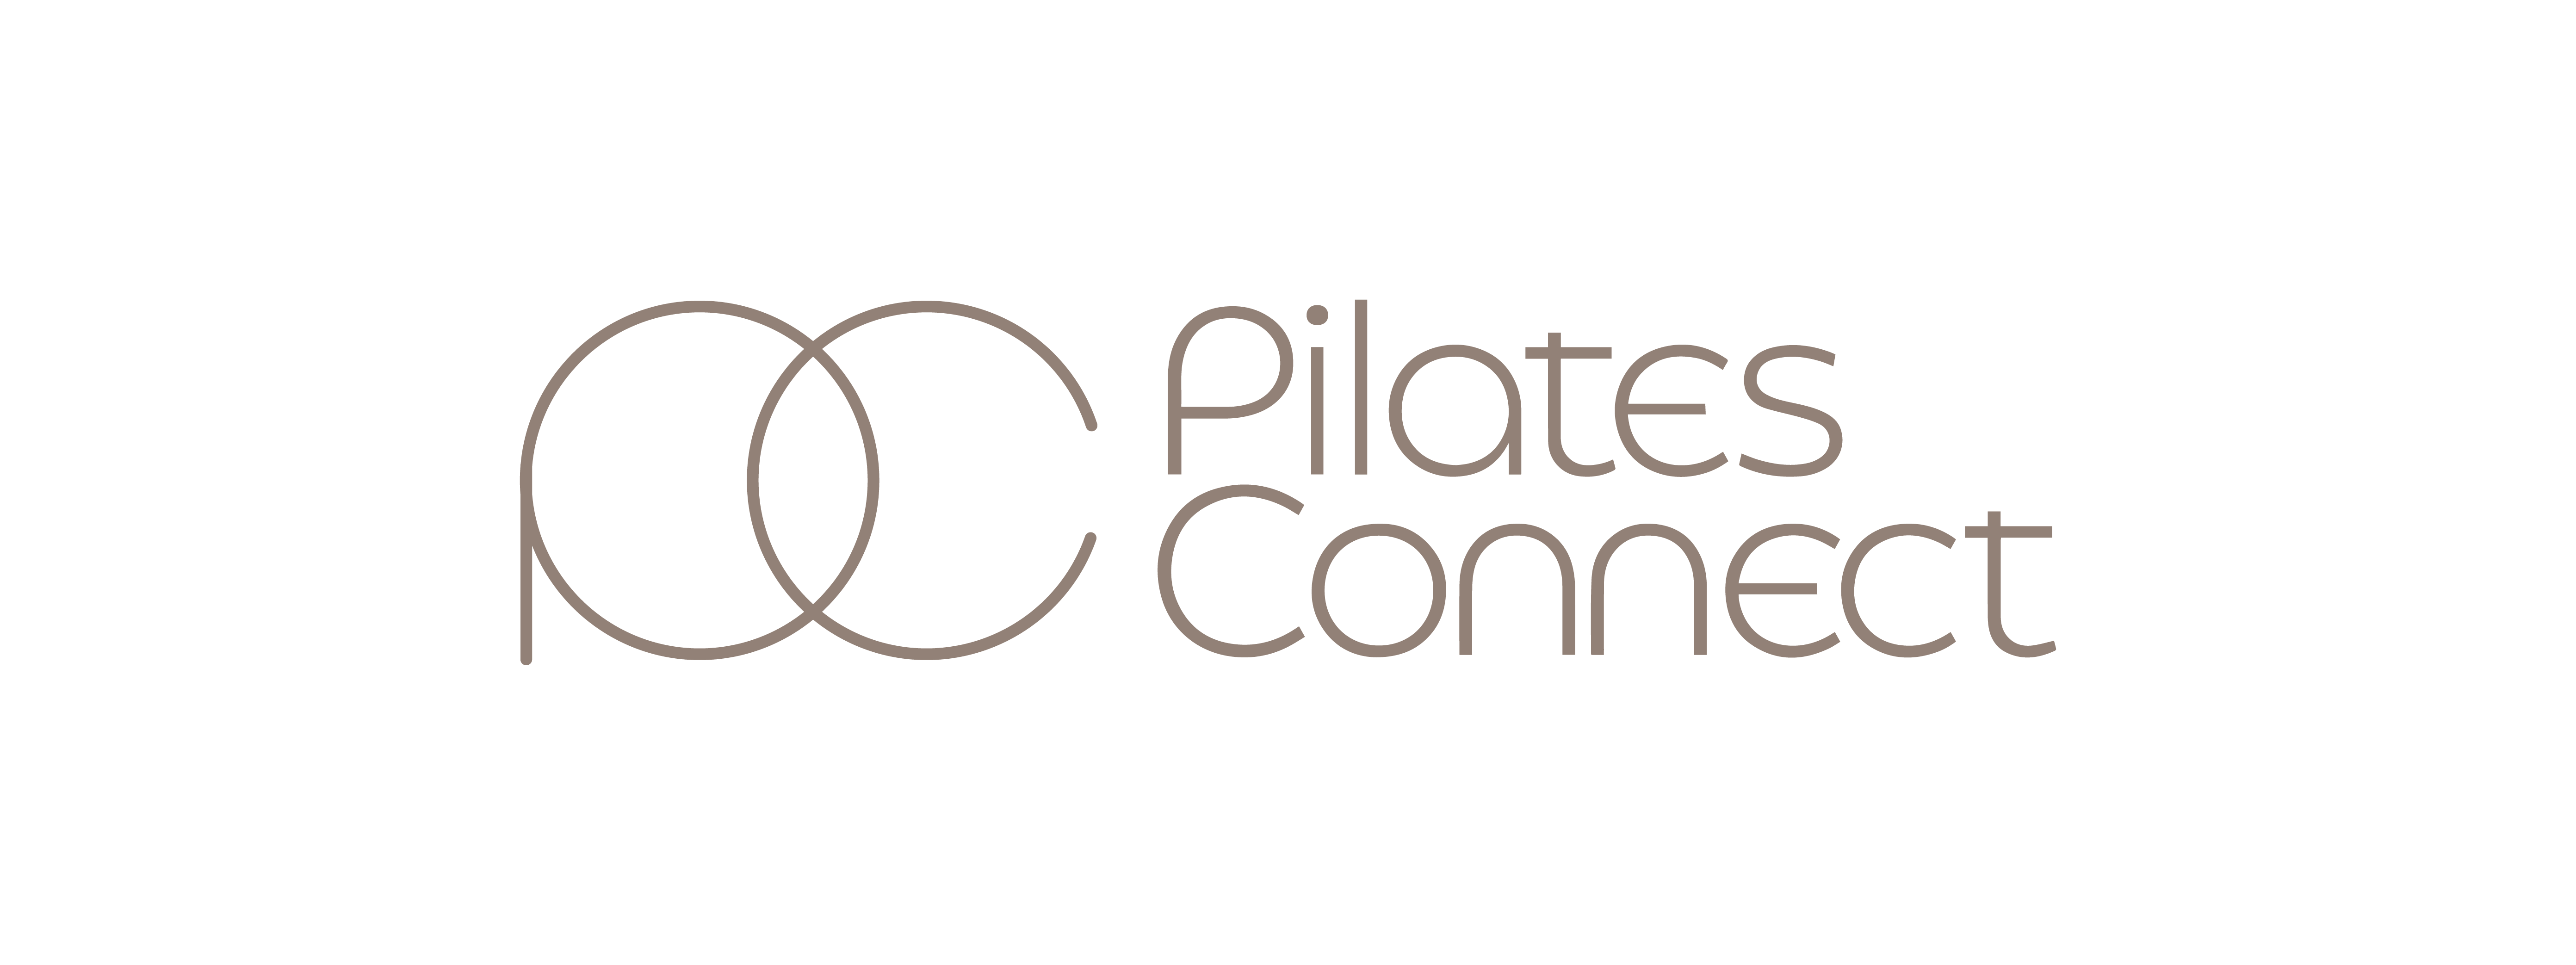 Company logo for Pilates Connect Pte. Ltd.